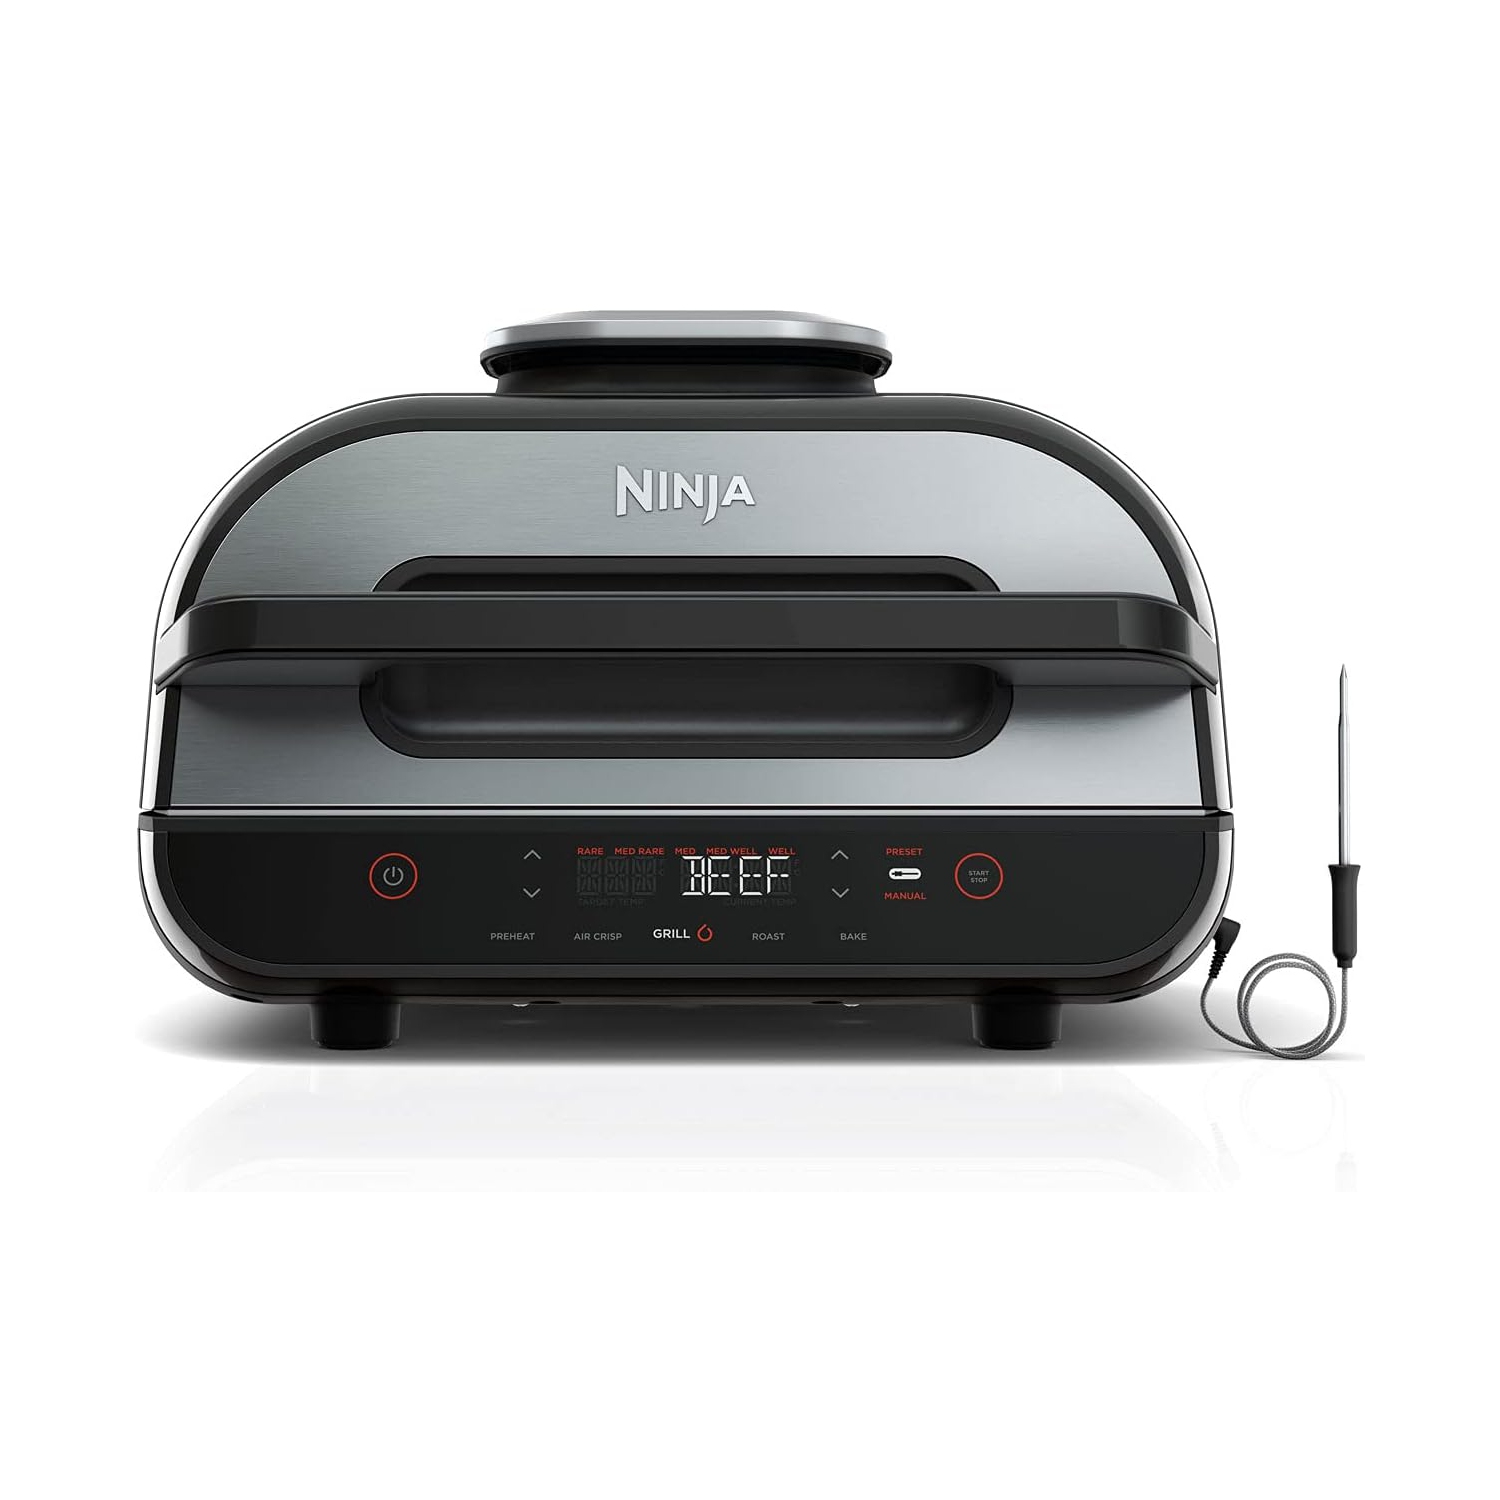 Open Box - Ninja Foodi Smart XL 4-in-1 Indoor Grill with 4-Quart Air Fryer Roast Bake Dehydrate Broil and Leave-in Thermometer